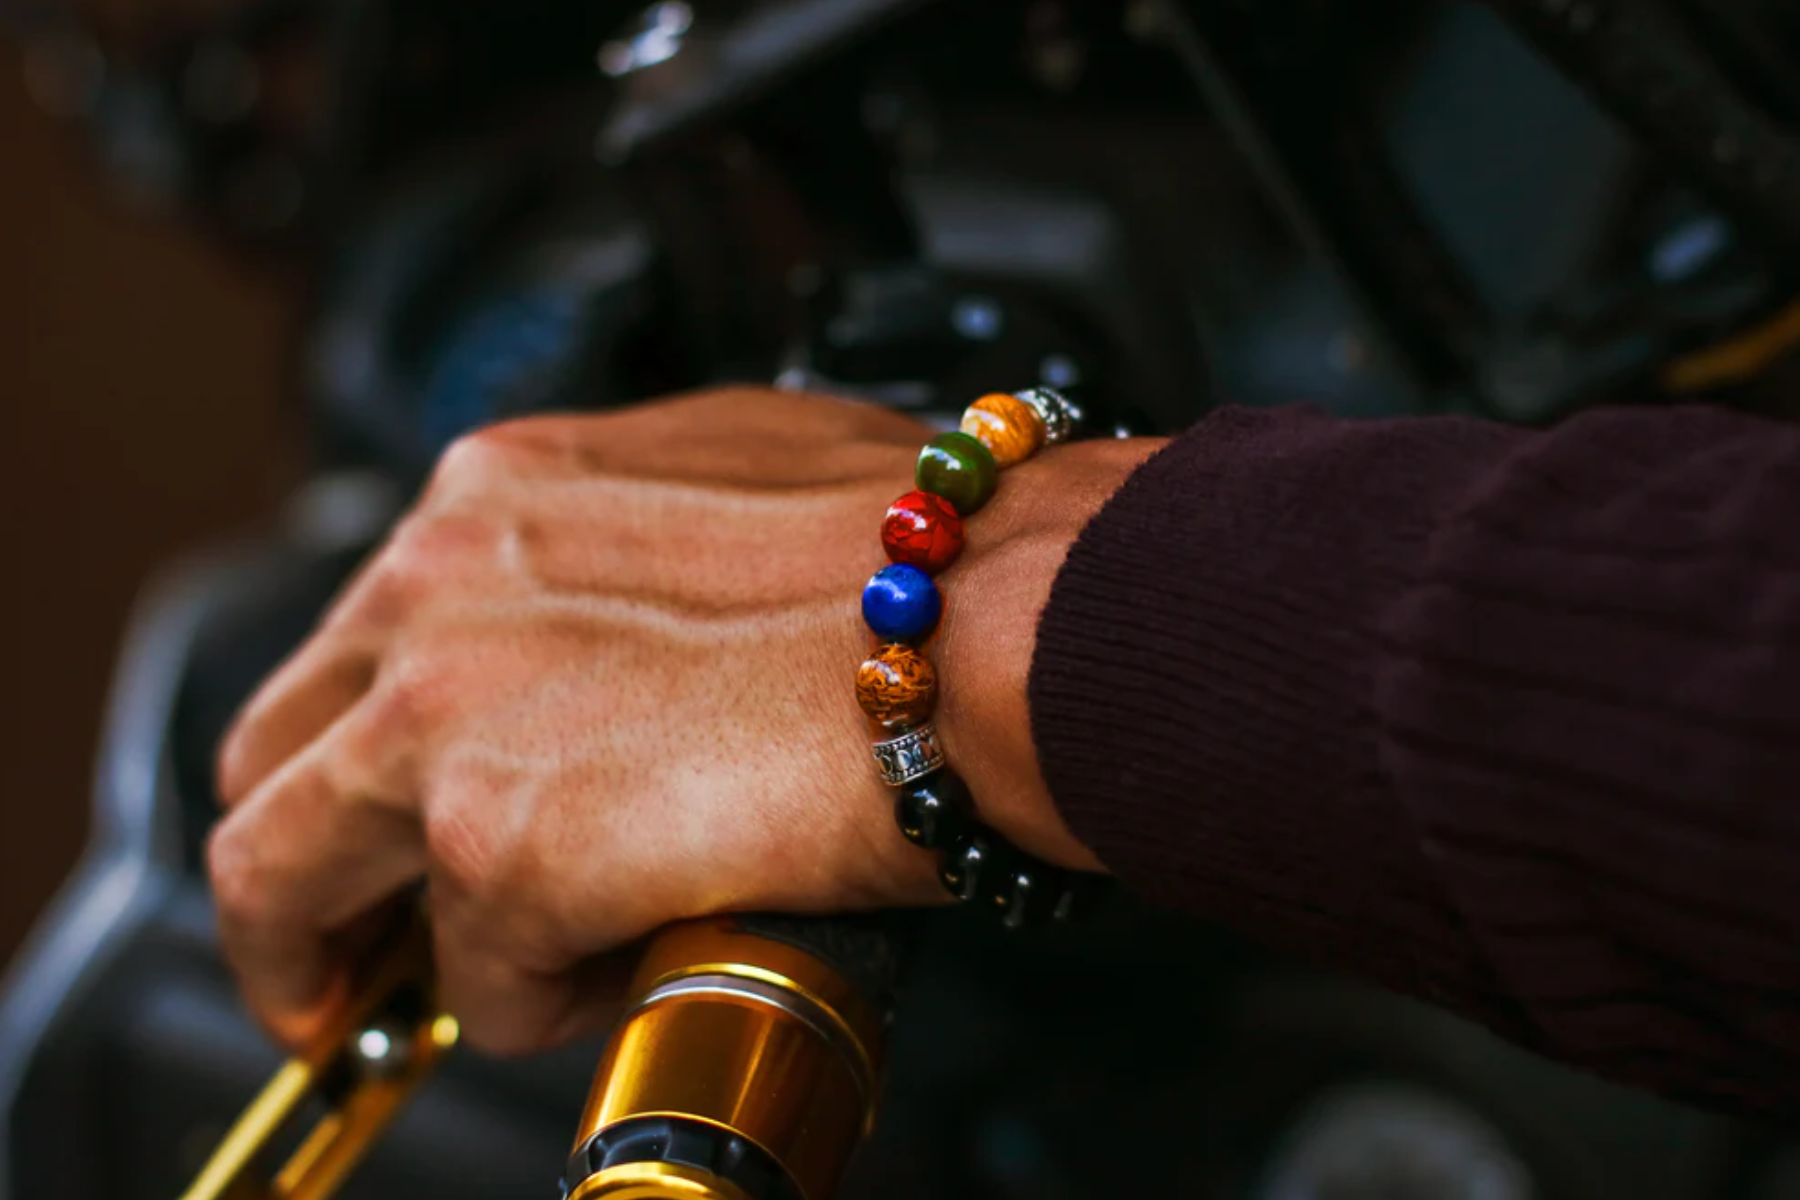 A man's hand wearing a colorful bracelet